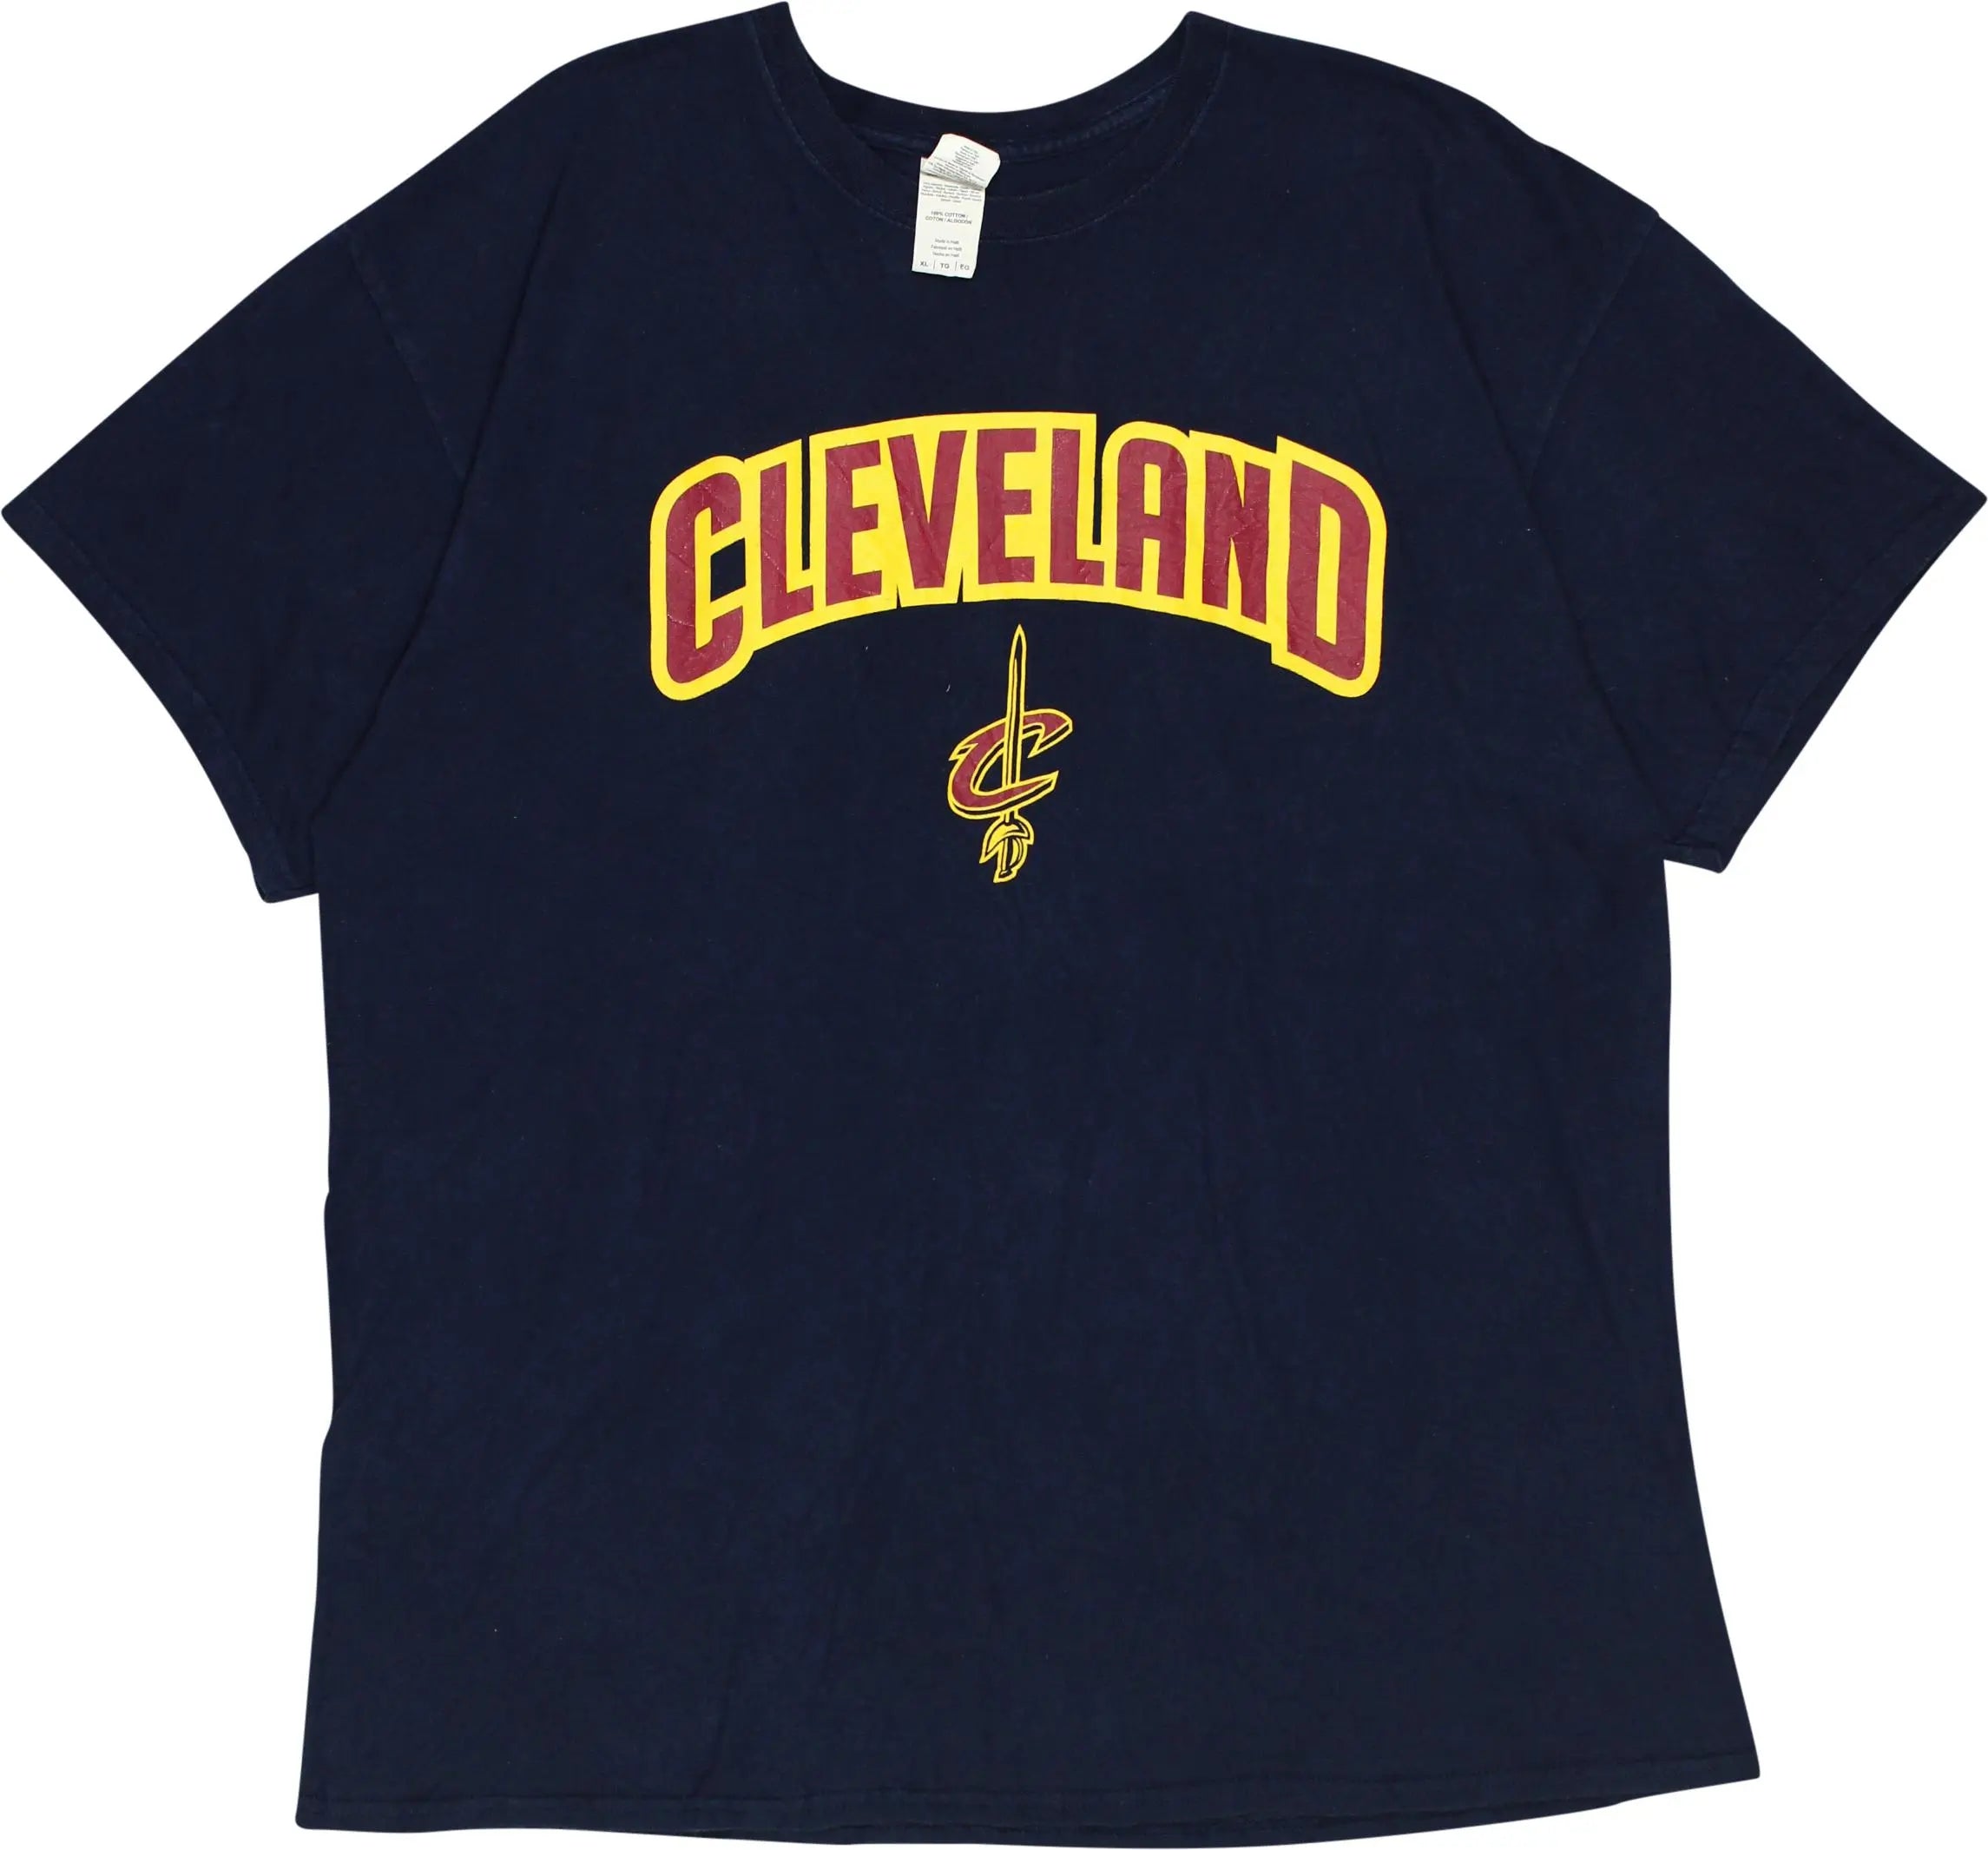 Gildan - Cleveland T-Shirt- ThriftTale.com - Vintage and second handclothing